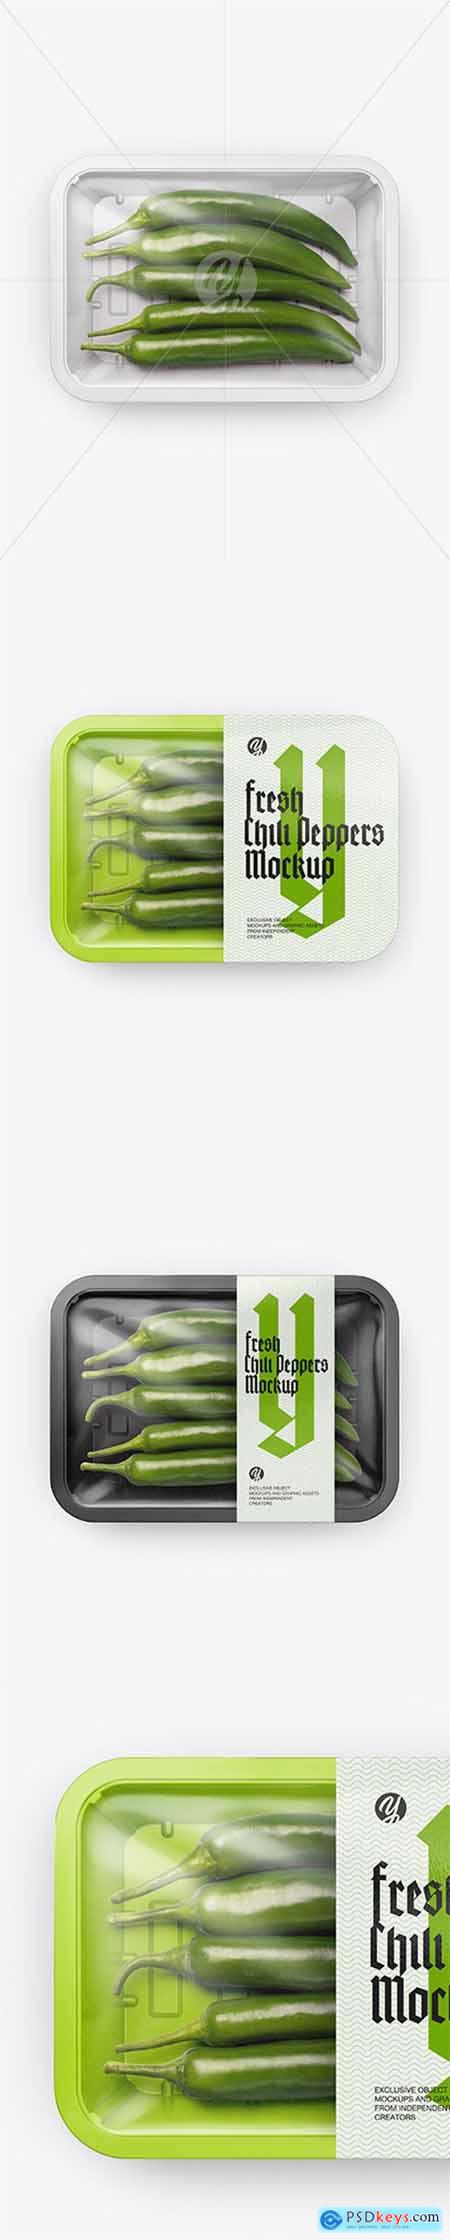 Download Plastic Tray With Green Chili Peppers Mockup 51867 » Free Download Photoshop Vector Stock image ...